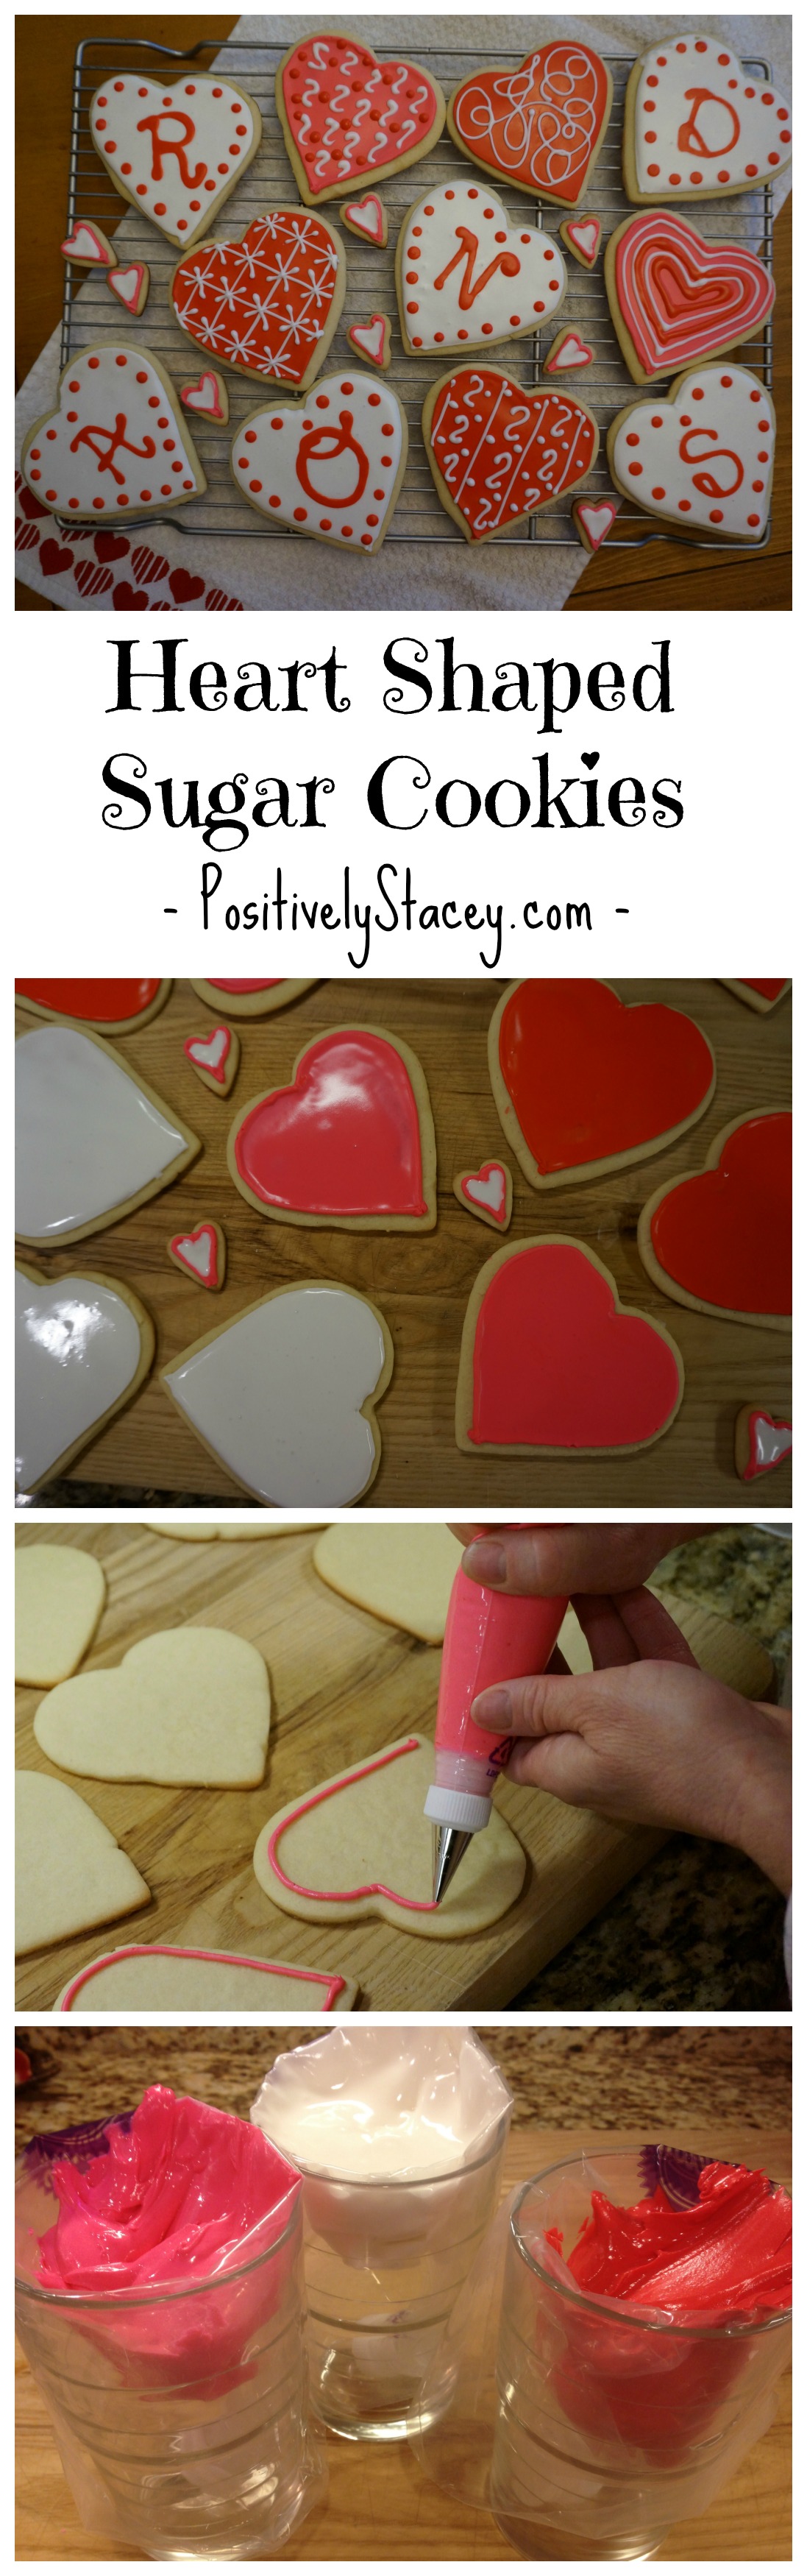 Heart Shaped Sugar Cookies - Perfect for Valentine's Day or for any day that you want to share a bit of sweet love! <3